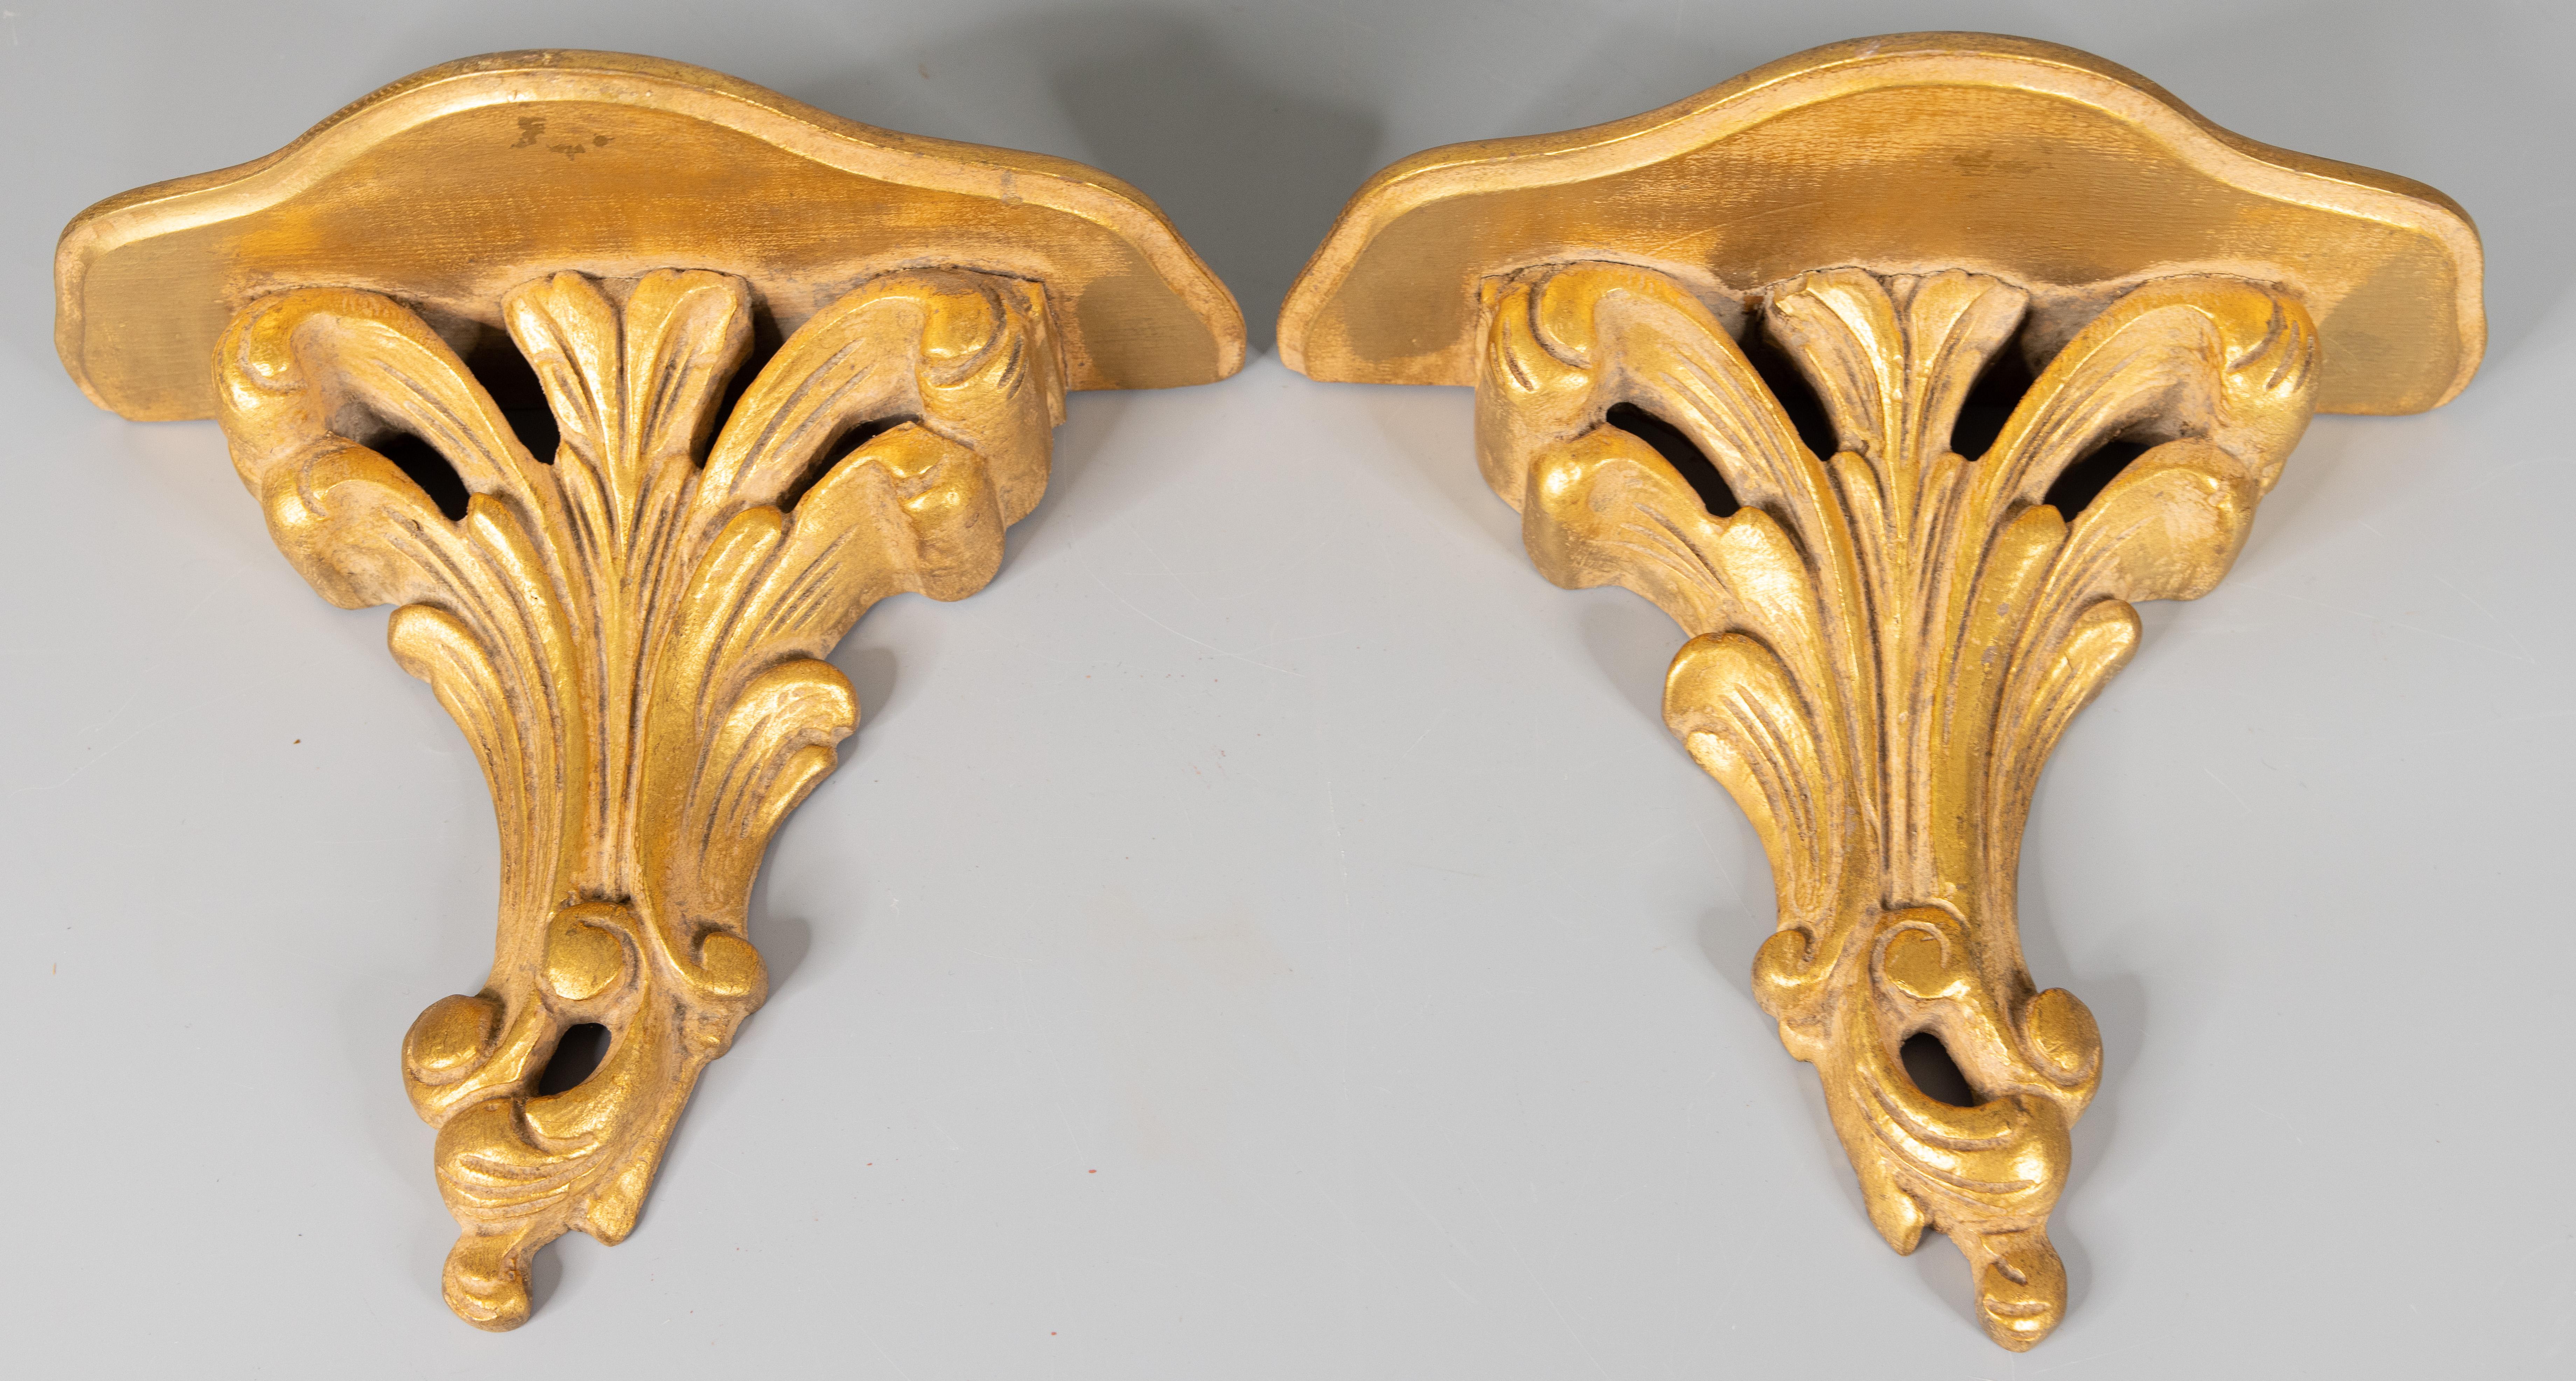 A lovely pair of vintage mid-century Italian gilded wood wall brackets shelves. These stunning brackets have hand carved scrolls in a beautiful gilt patina. They are perfect for displaying decorative collectibles or fabulous on their own.